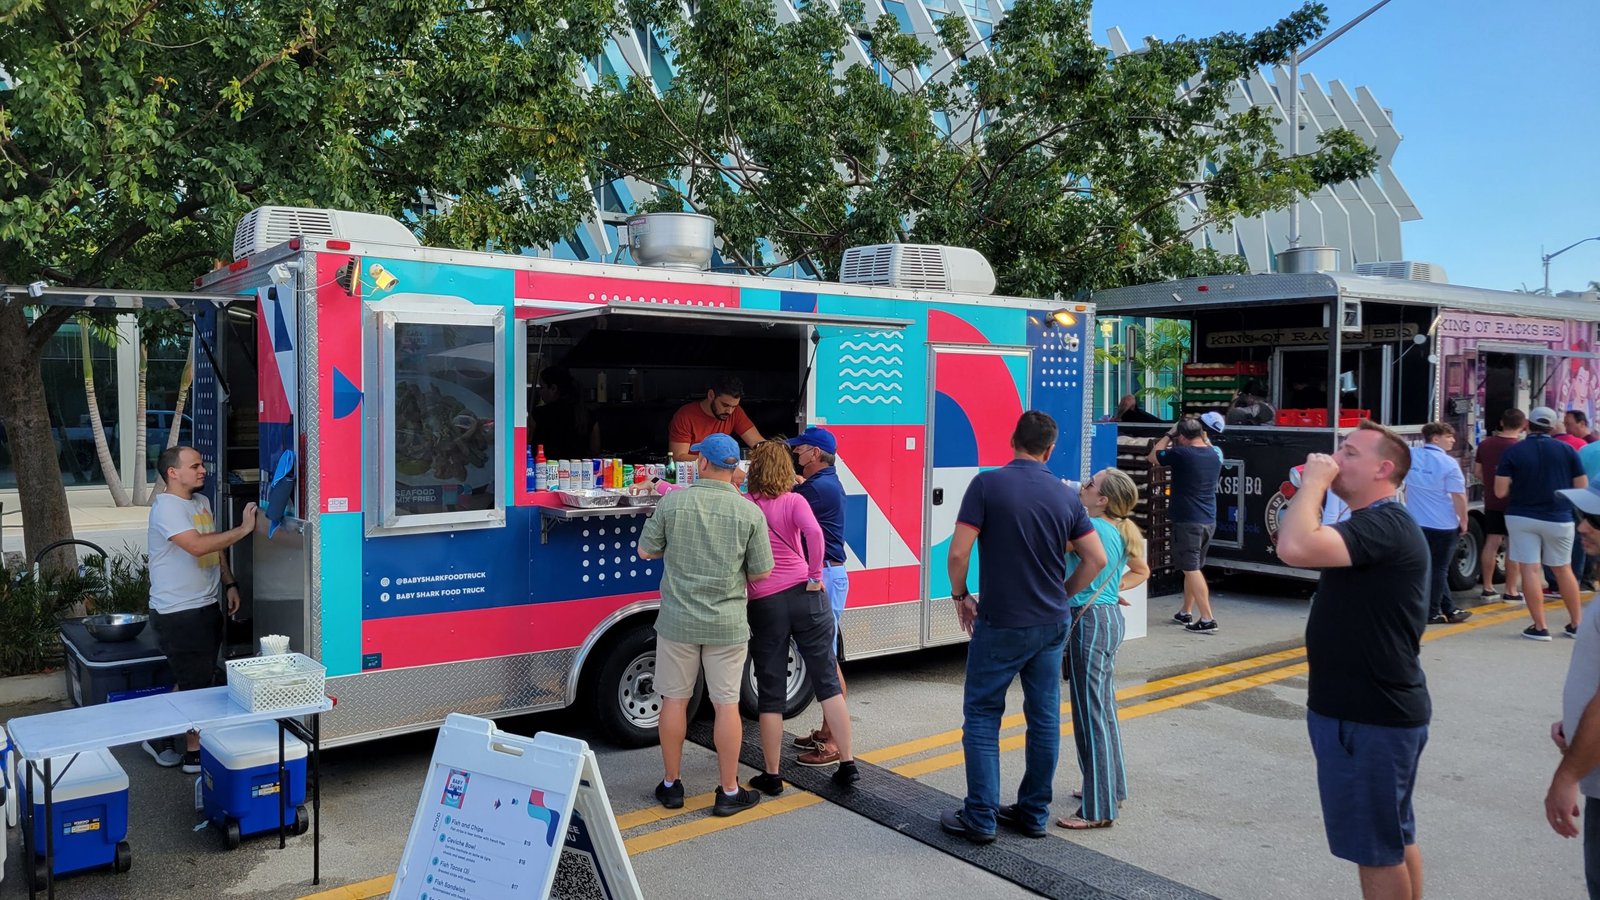 Do you have a Food Truck Project?